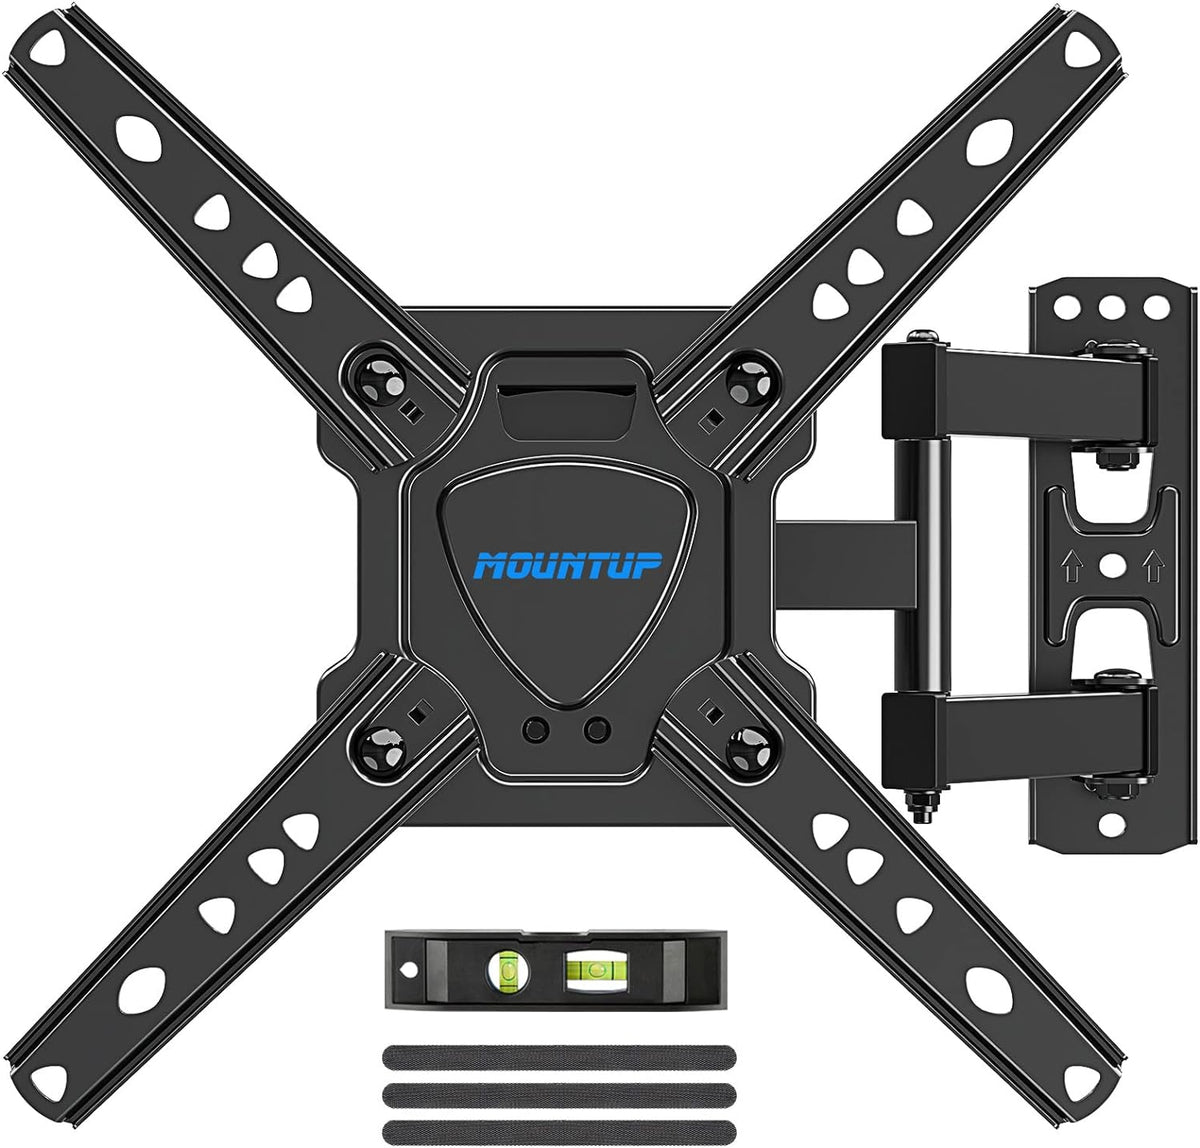 MOUNTUP Full Motion TV Wall Mount for Most 26-50 Inch TVs